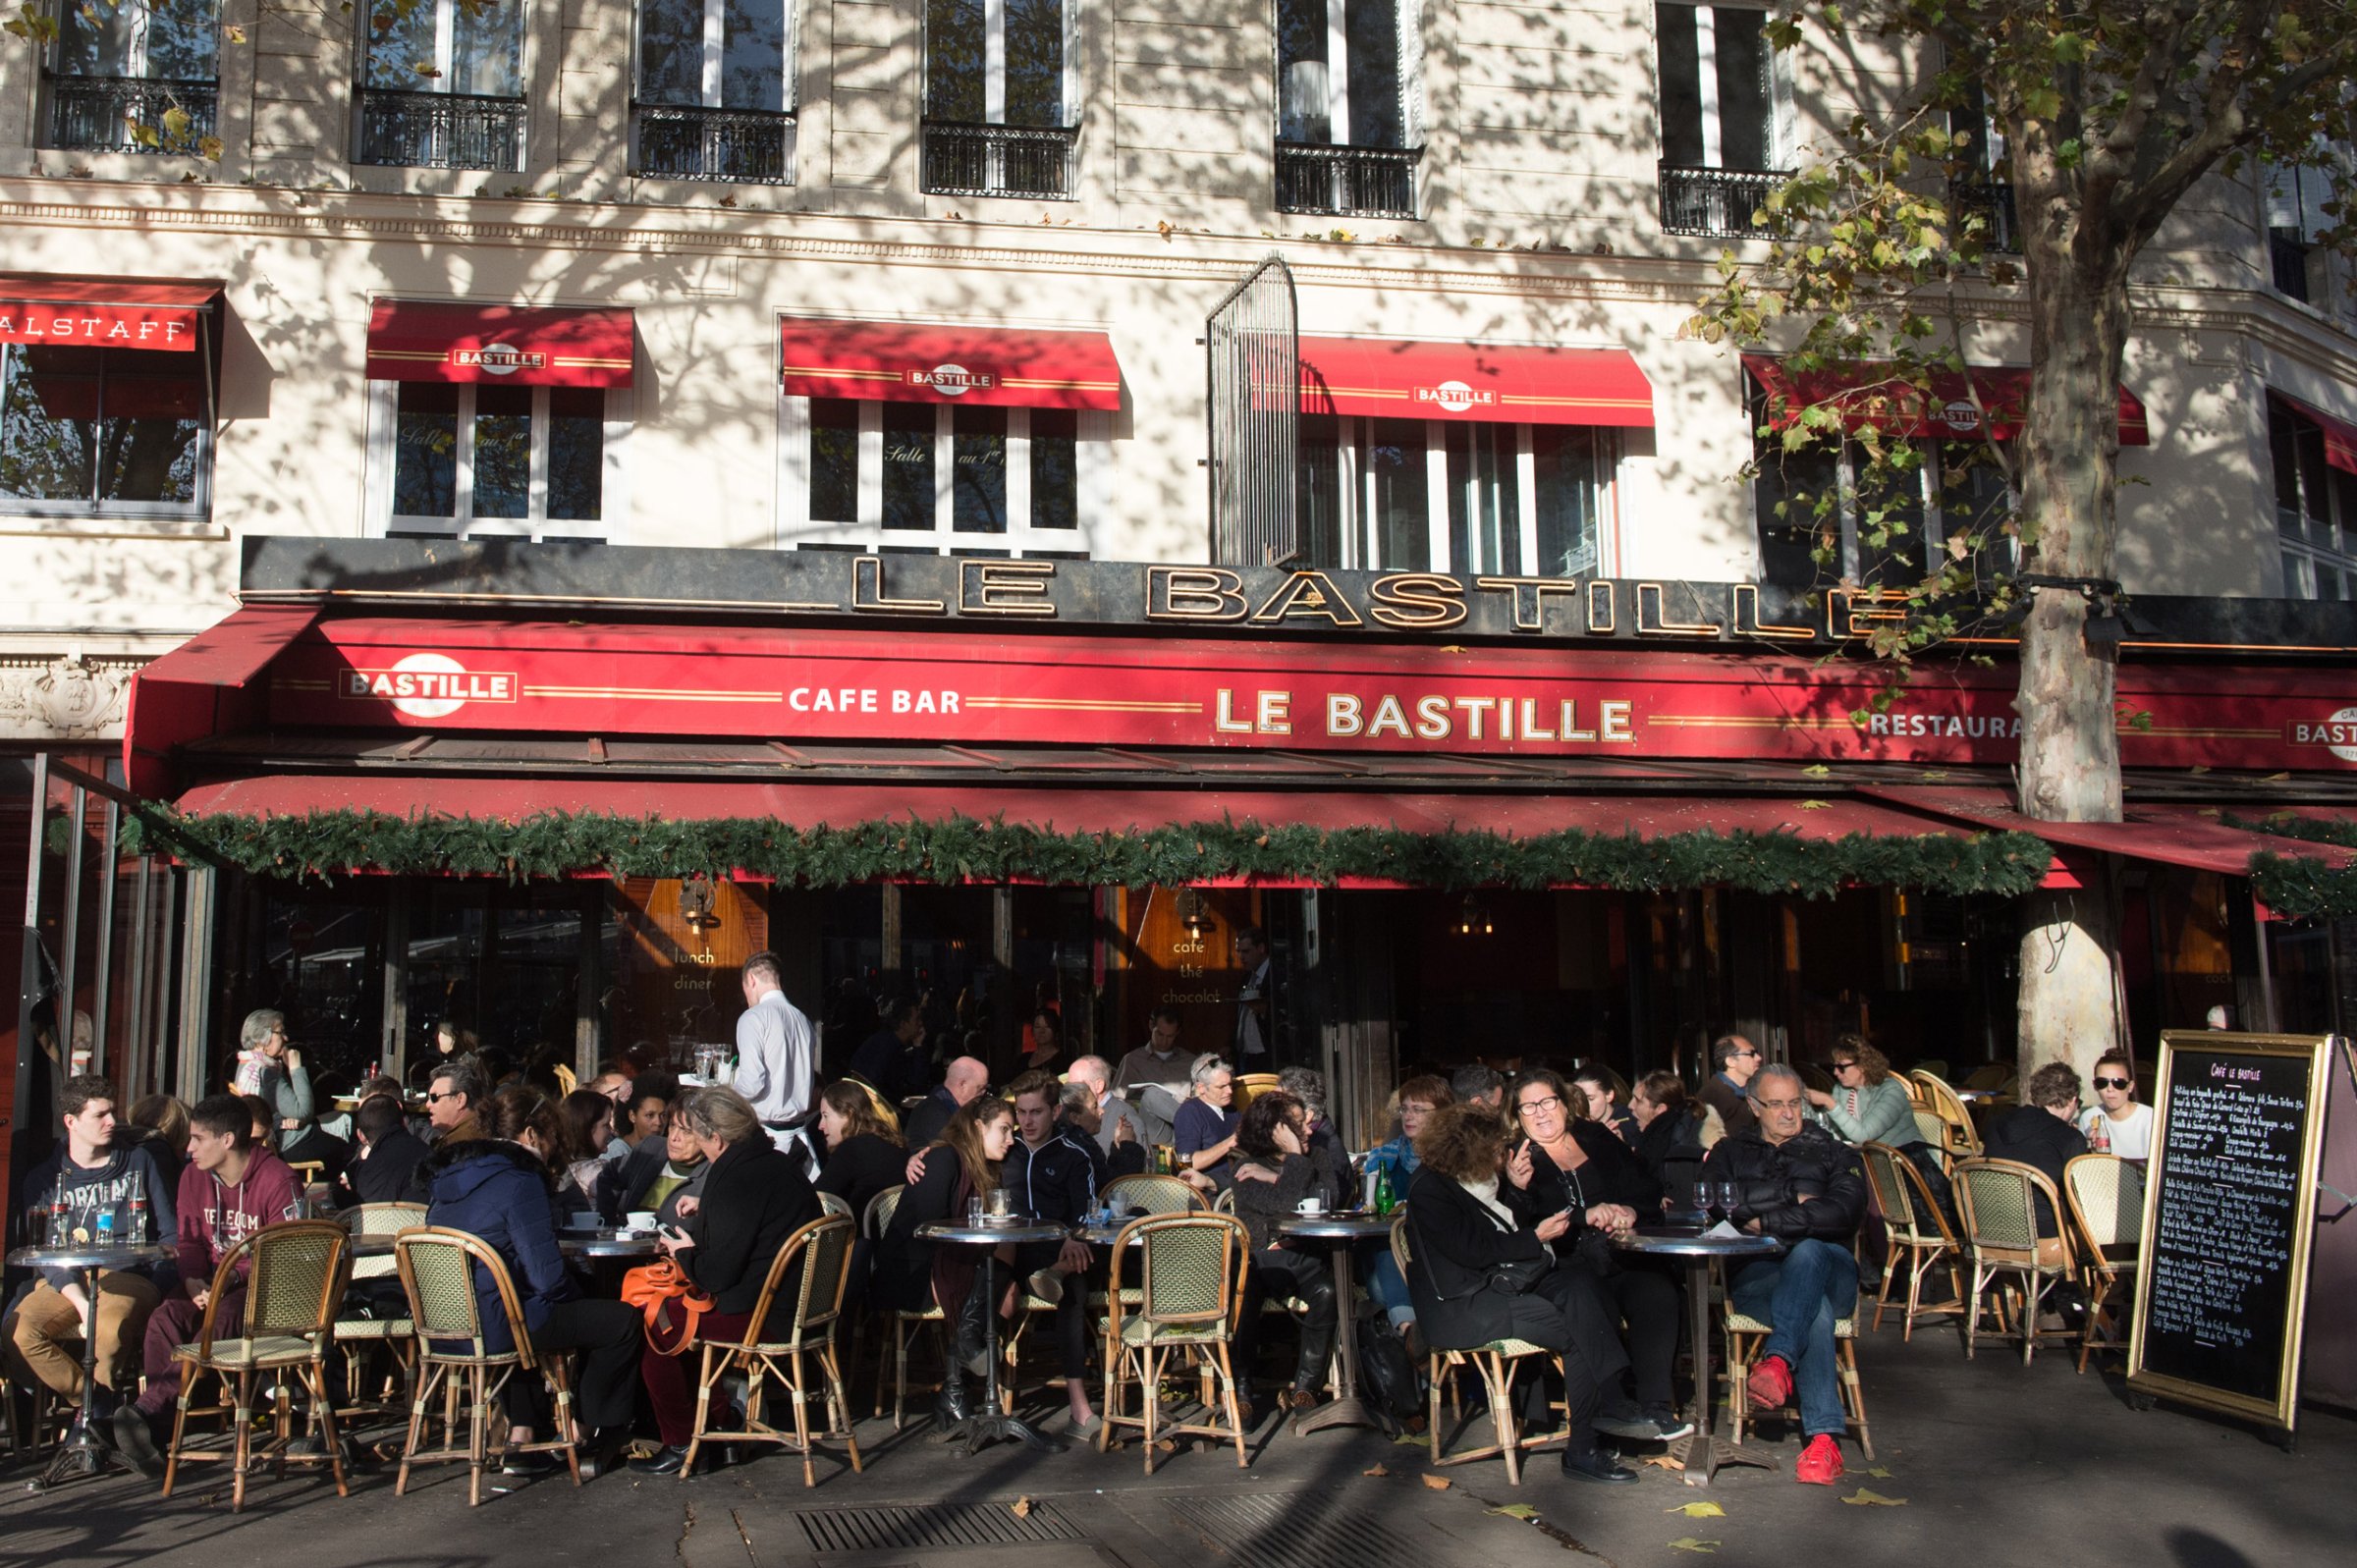 PARIS, FRANCE - NOVEMBER 15: Parisians sitting on the terraces of bars as usual on Sunday in Place de la Bastille on November 15, 2015 in Paris, France. At least 120 people have been killed and over 200 injured, 80 of which seriously, following a series of terrorist attacks in the French capital. (Photo by Thierry Orban/Getty Images)